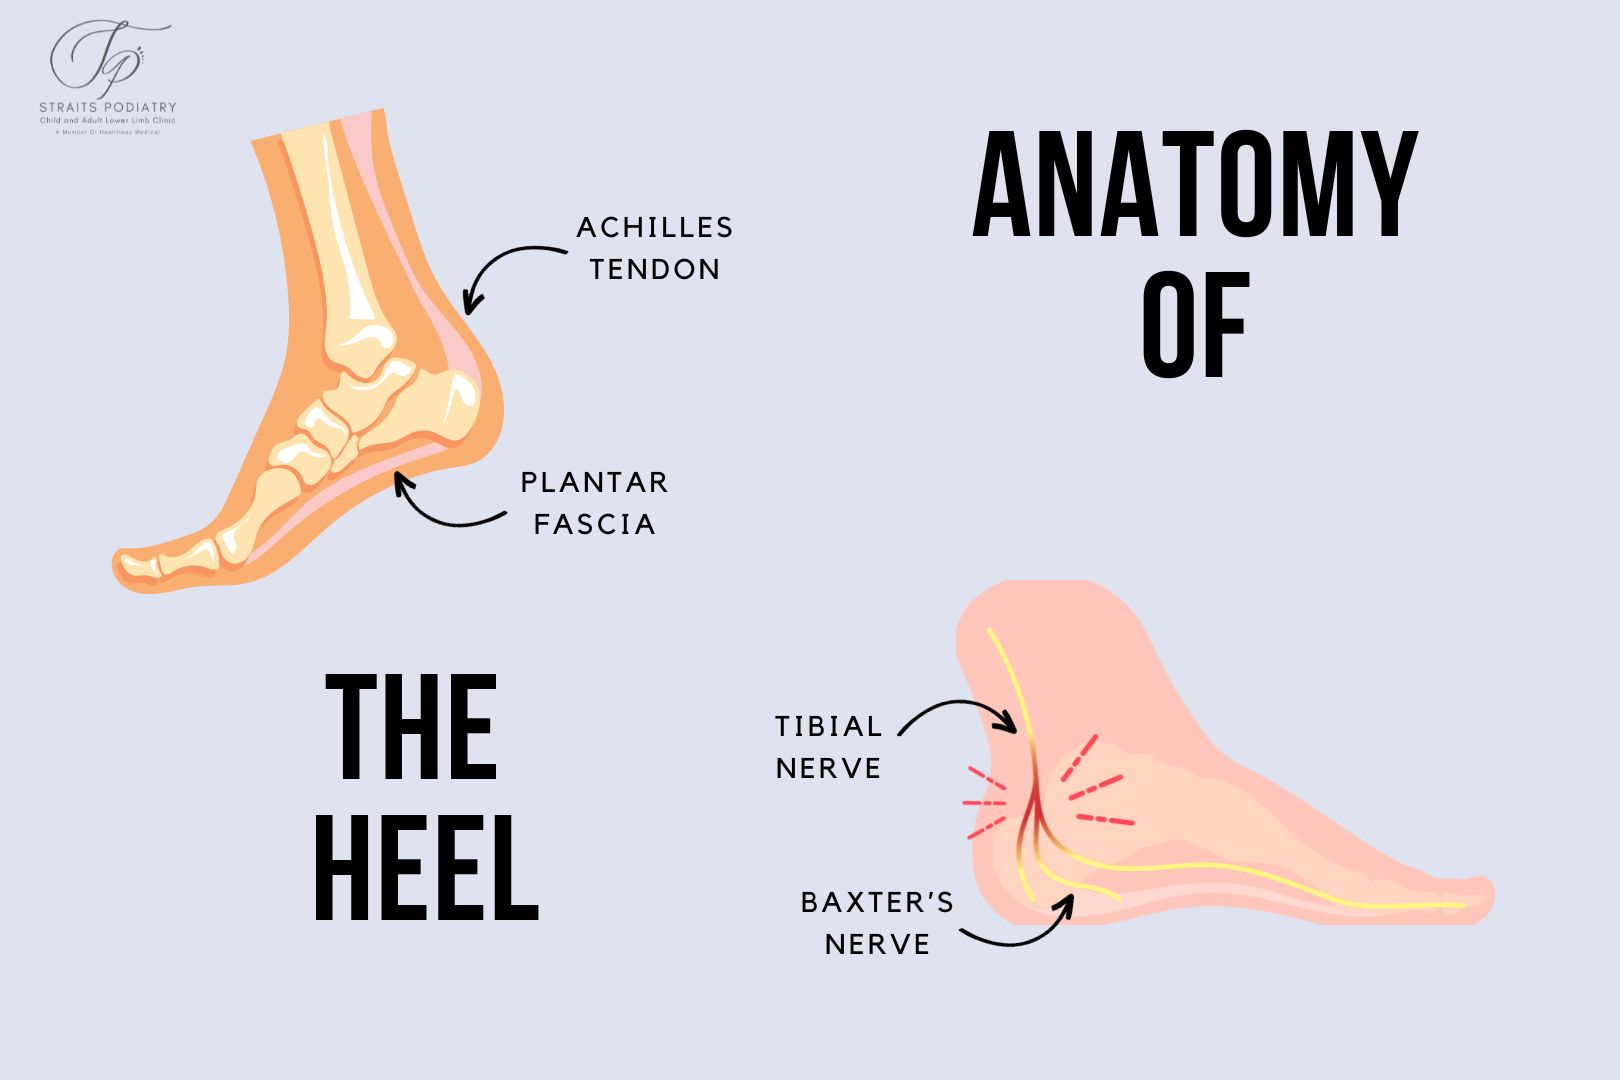 Anatomy of the heel by Straits Podiatry. An infographic showing the achilles tendon, plantar fascia, tibial nerve, and baxter's nerve of the foot.